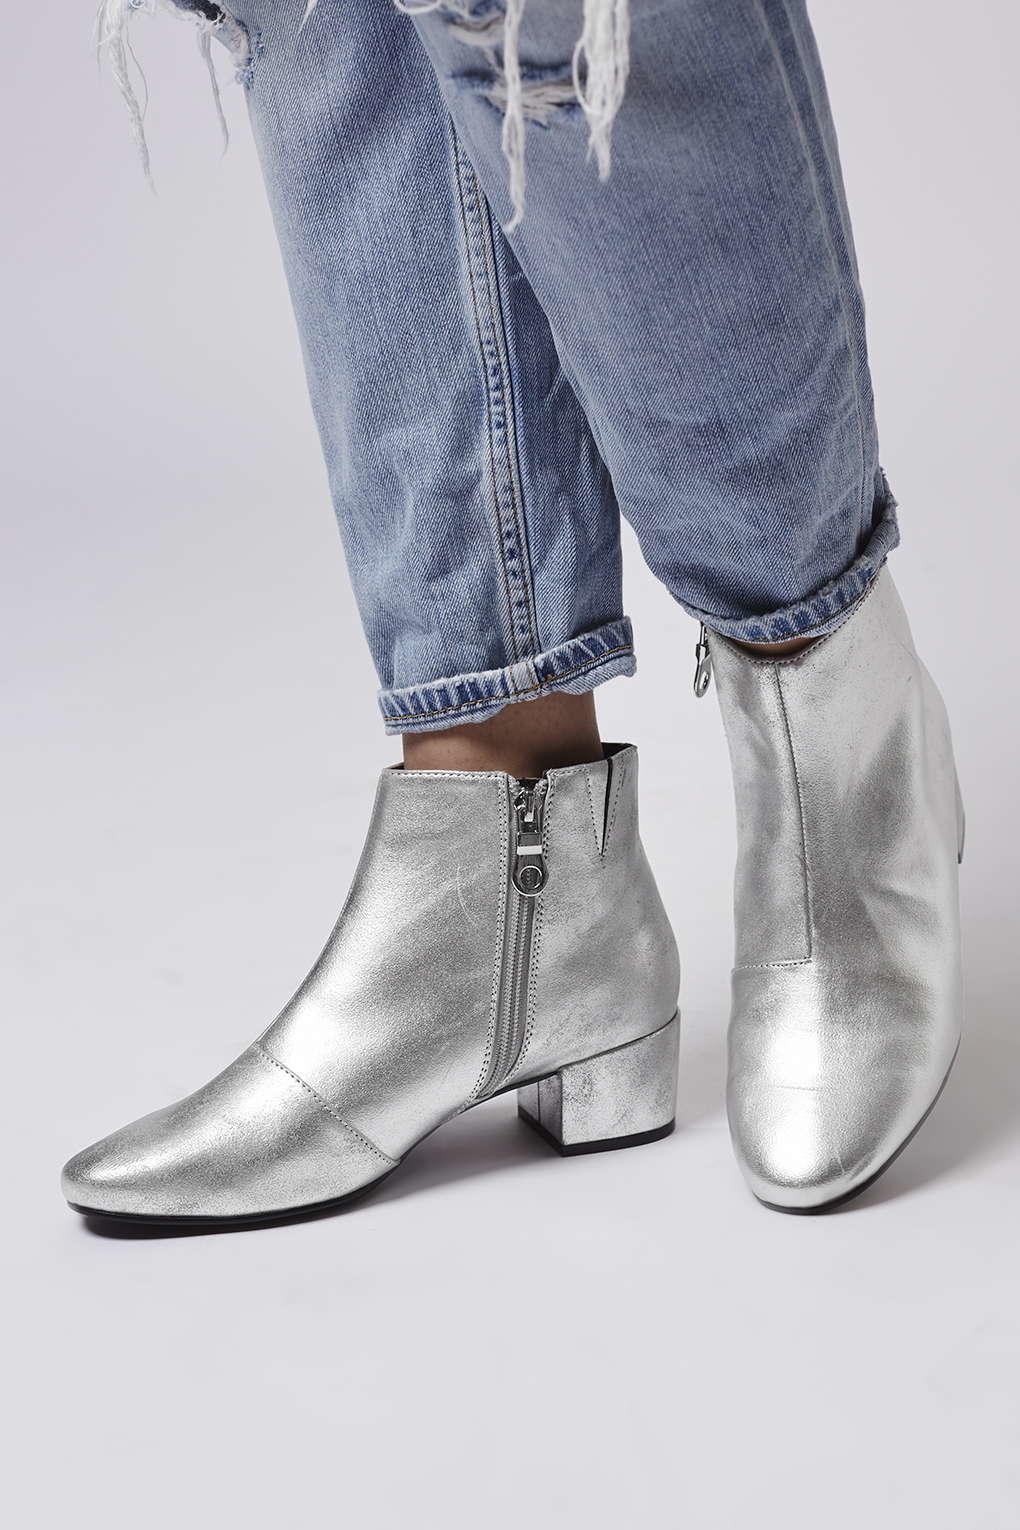 silver boots topshop